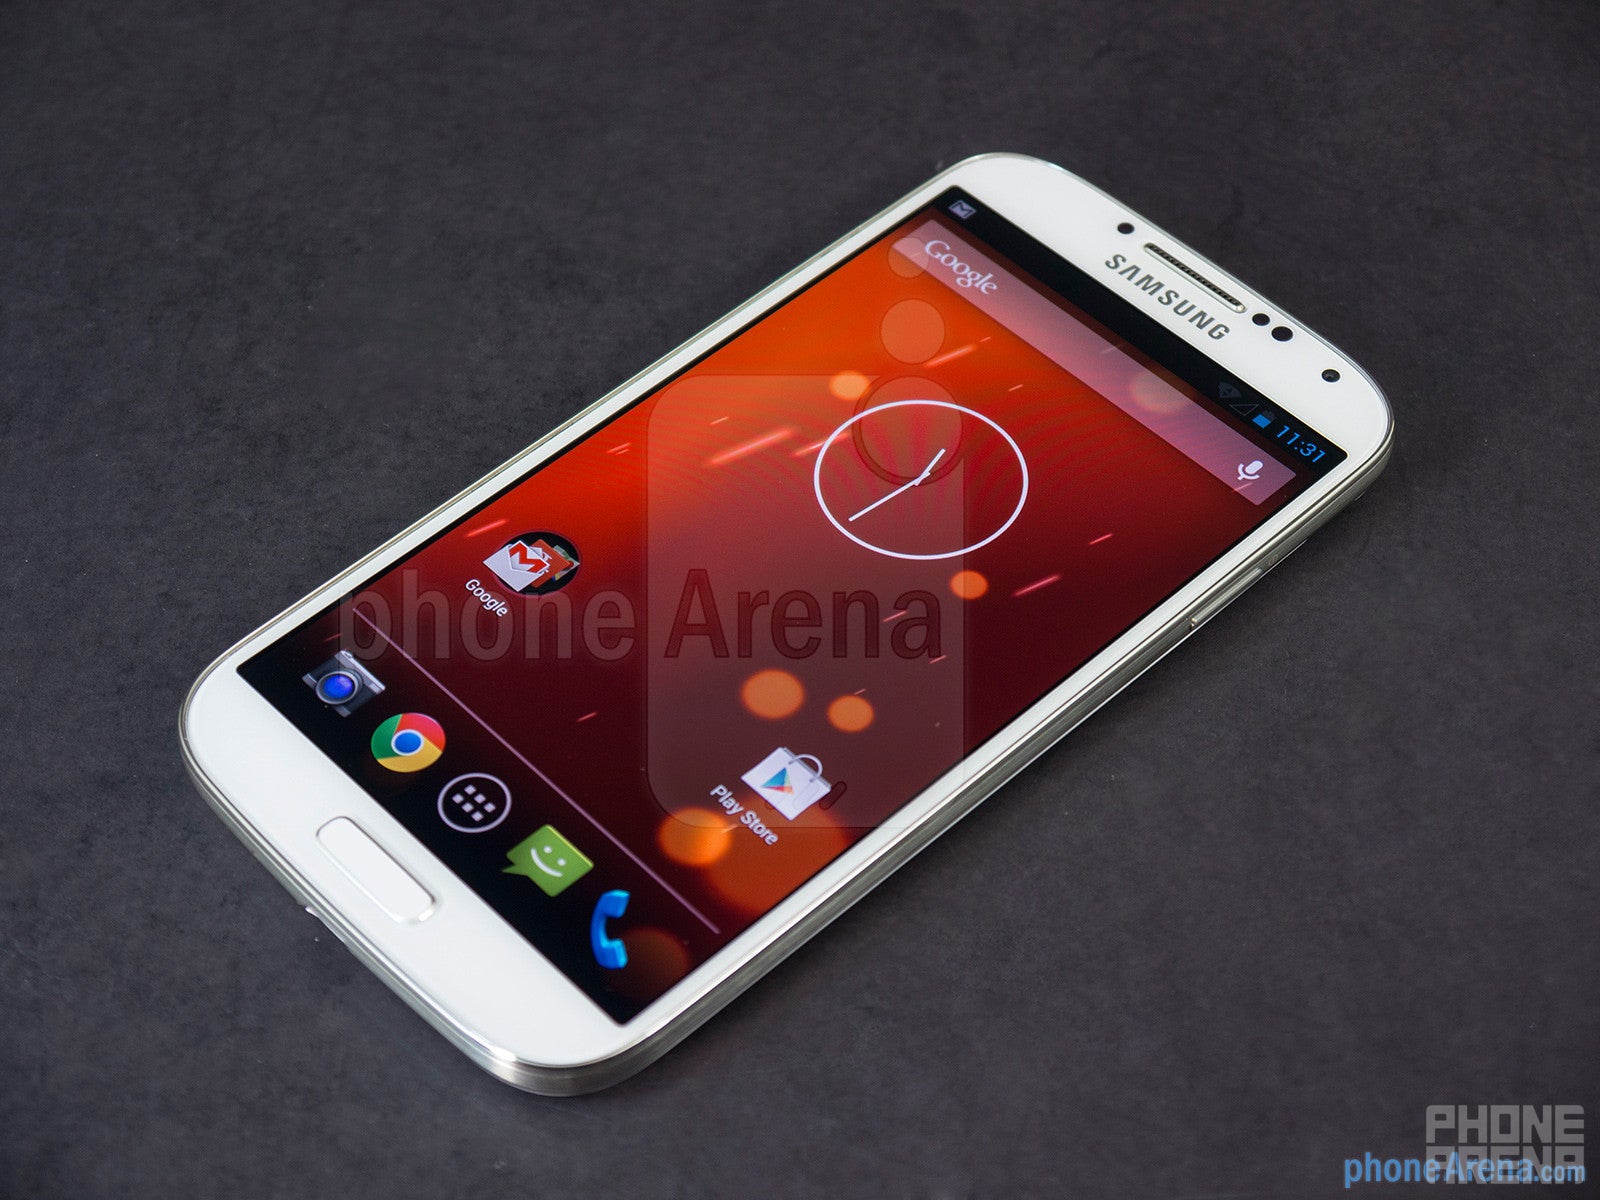 Samsung Galaxy S4 Google Play Edition Review